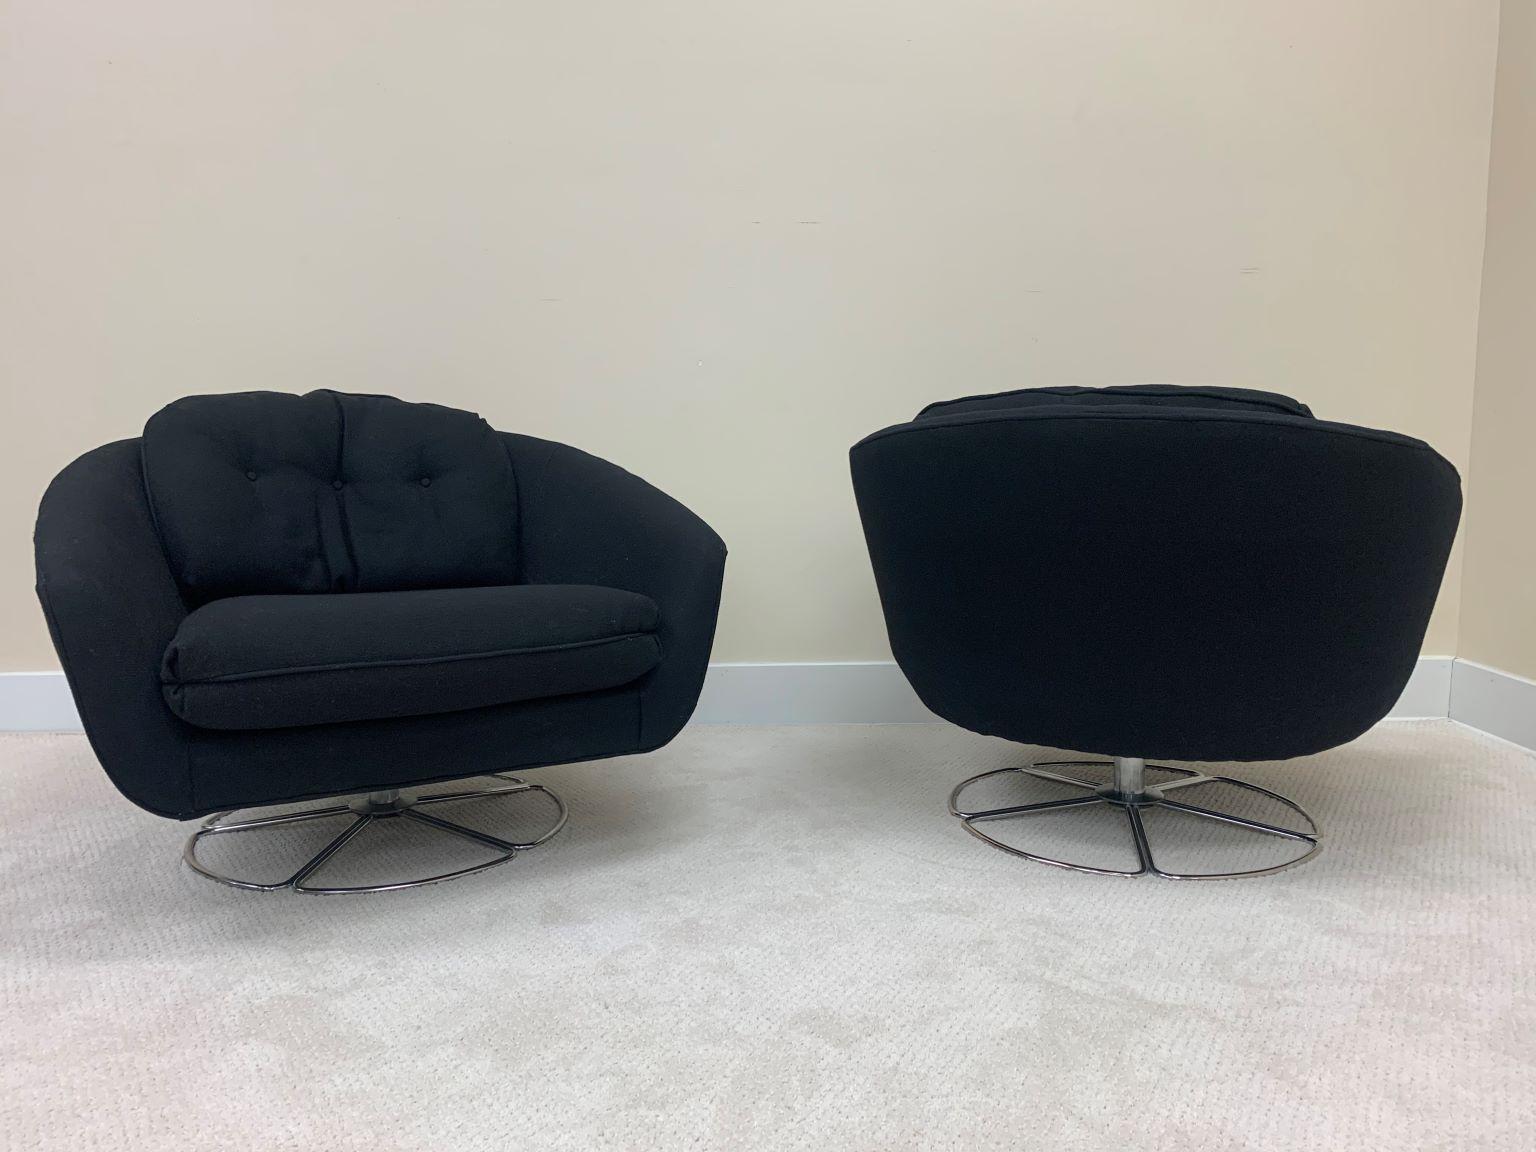 Beautiful pair of vintage 1970s chrome base lounge chairs by Selig. Both chairs retain the original Selig manufacturing labels. In addition to the labels, a shipping document with an additional fabric sample is attached. Chairs are currently